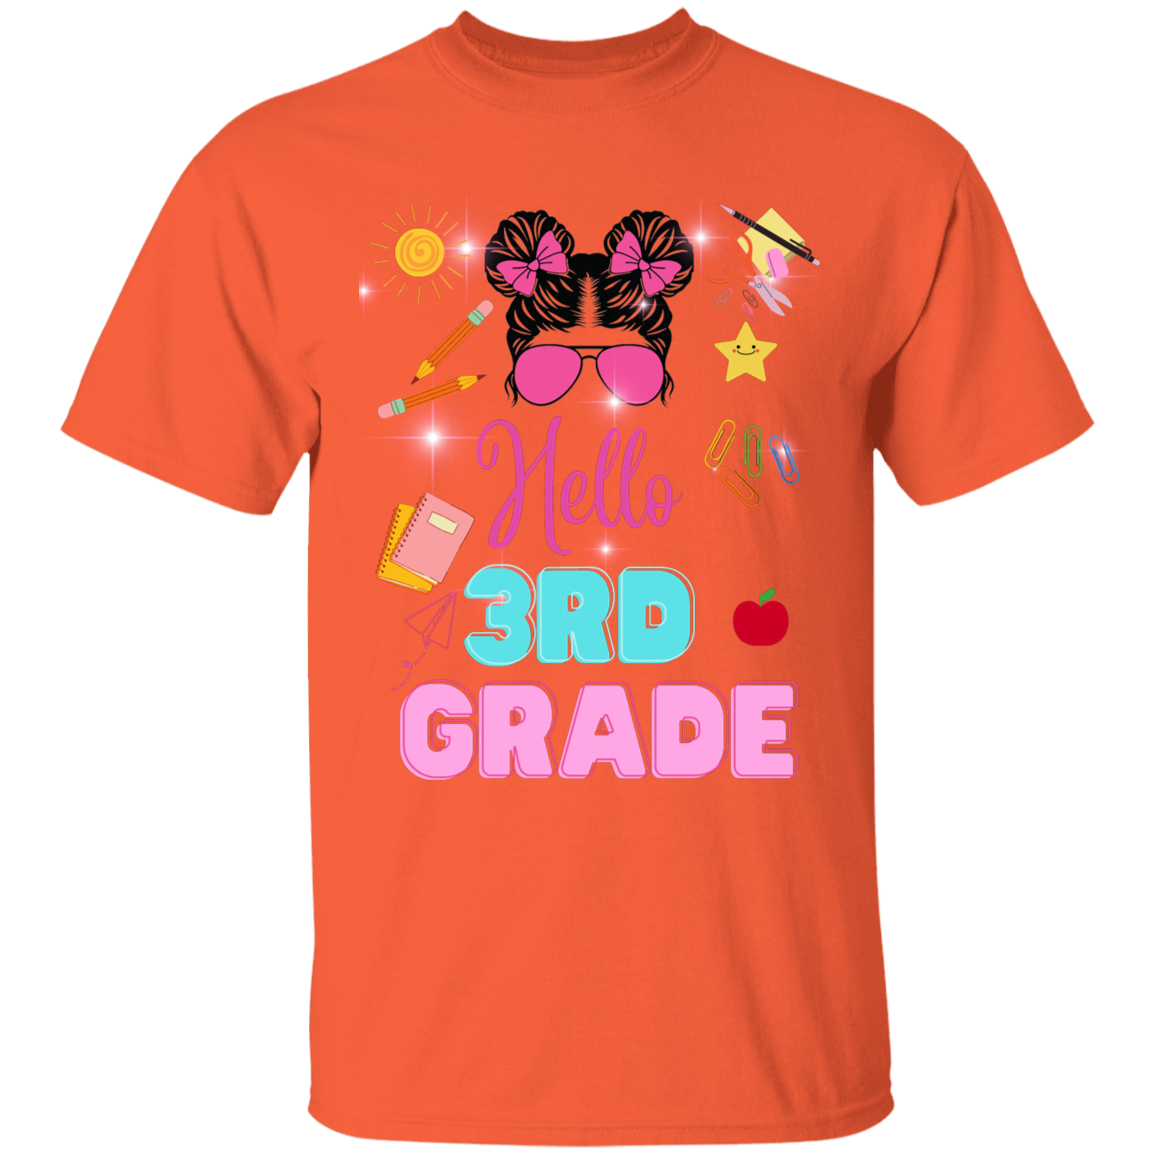 Girls youth Back-to-School T-Shirt Sale: Trendy T-Shirt. Funny back-to-school t-shirts